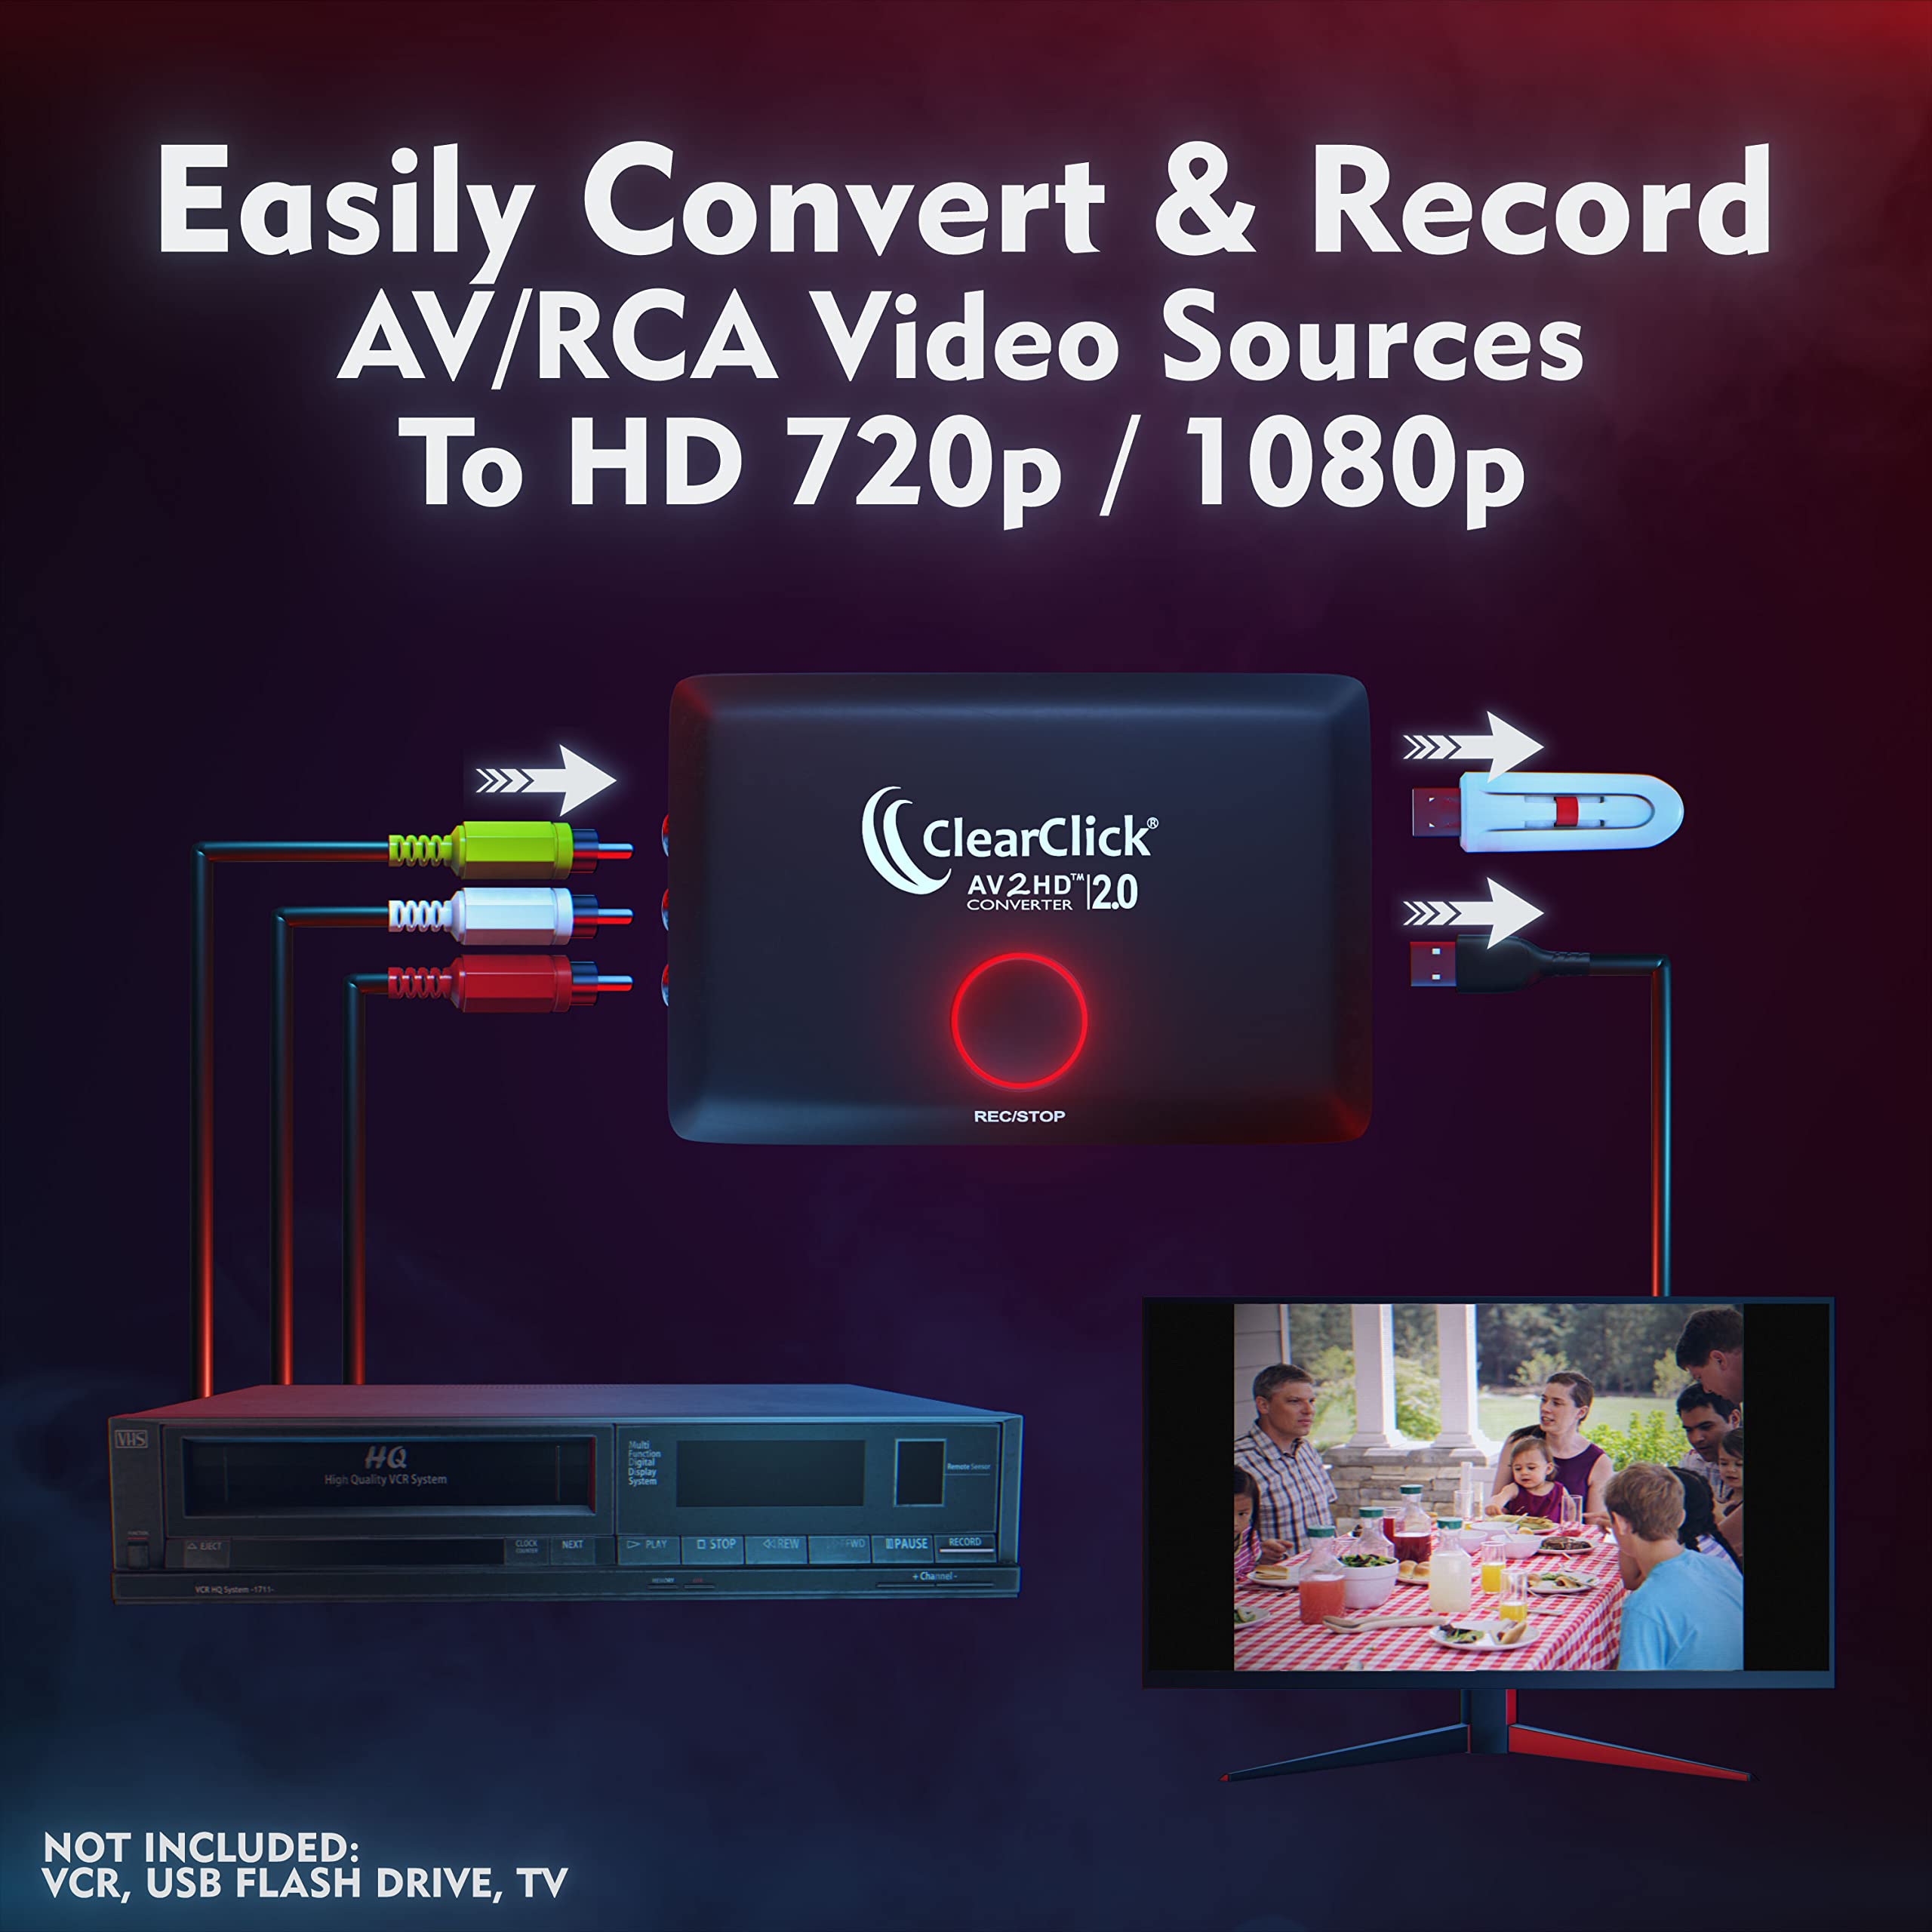 ClearClick AV to HD Converter & Recorder 2.0 (Second Generation) - AV RCA to HDMI Adapter to Convert & Record Video - for VCR, VHS, DVD, Camcorder, Hi8, Gaming to TV